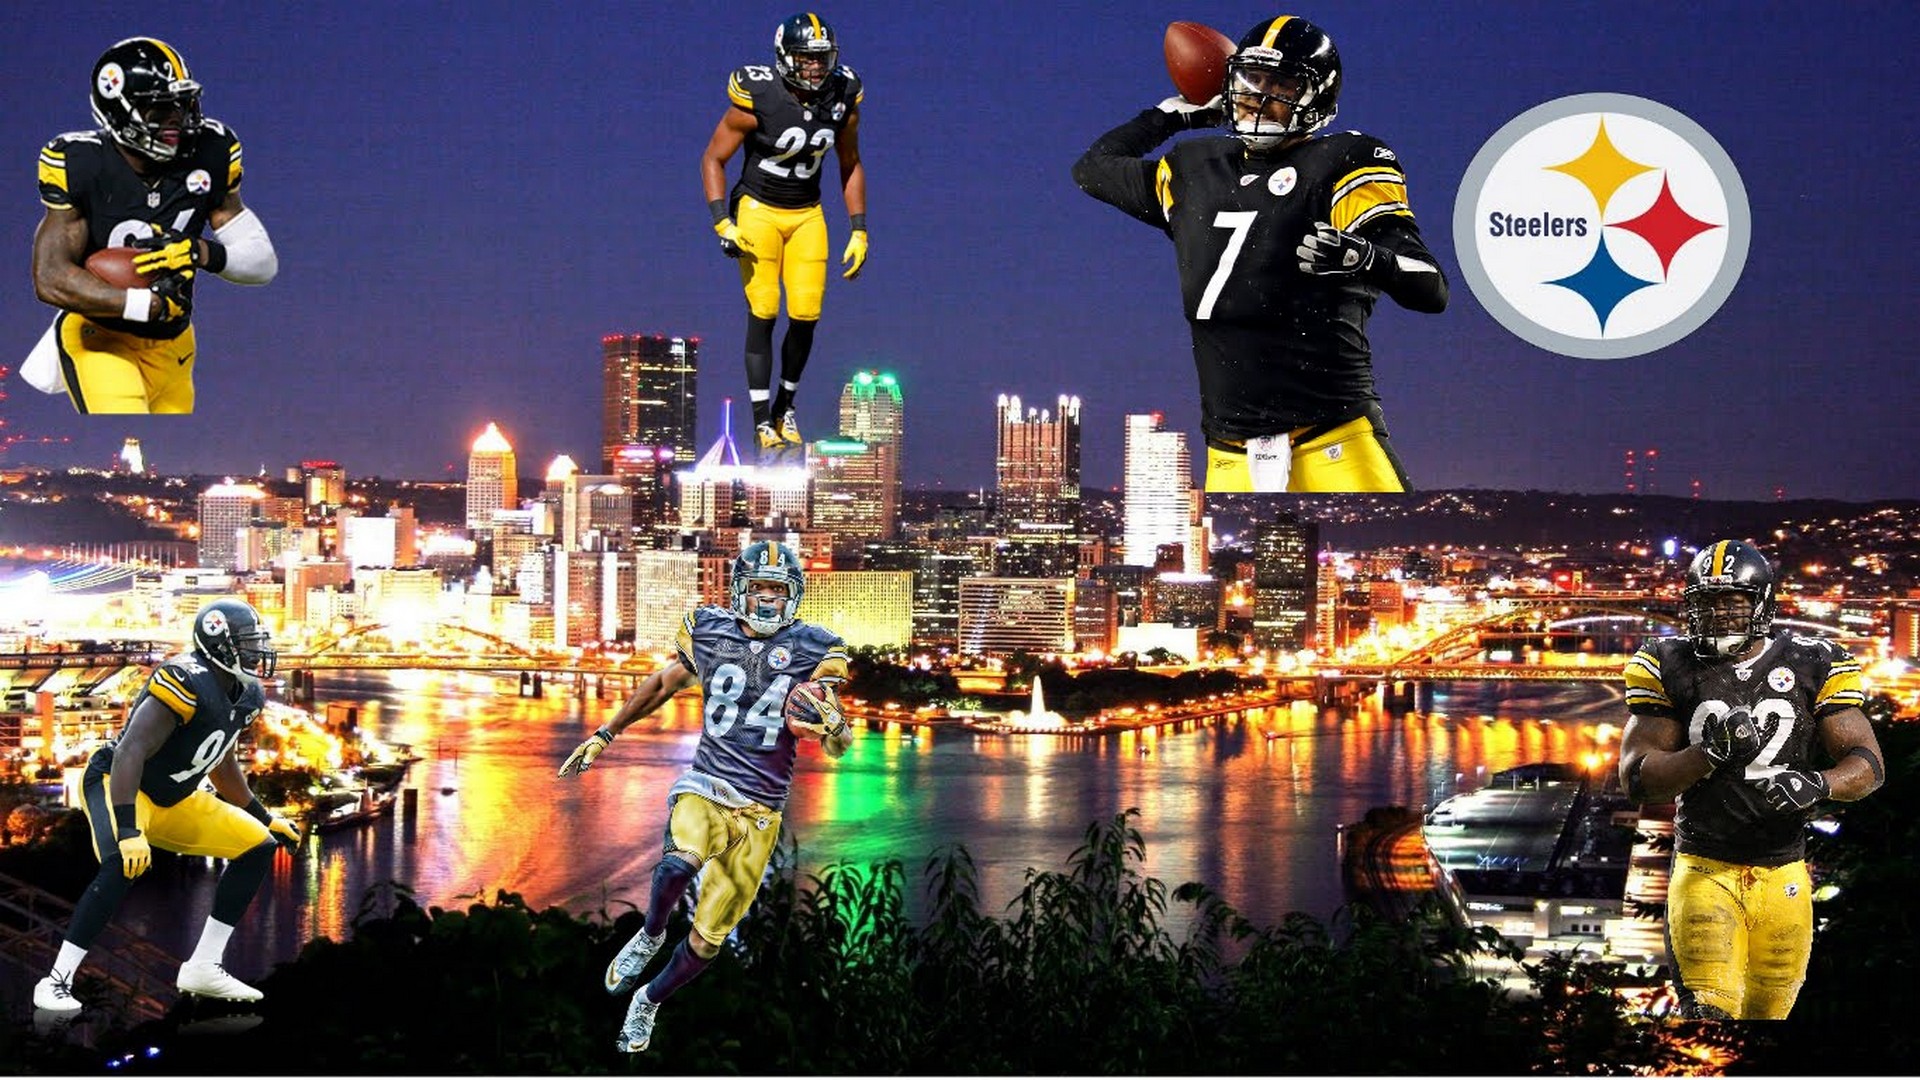 Steelers Super Bowl Desktop Wallpaper with resolution 1920x1080 pixel. You can make this wallpaper for your Mac or Windows Desktop Background, iPhone, Android or Tablet and another Smartphone device